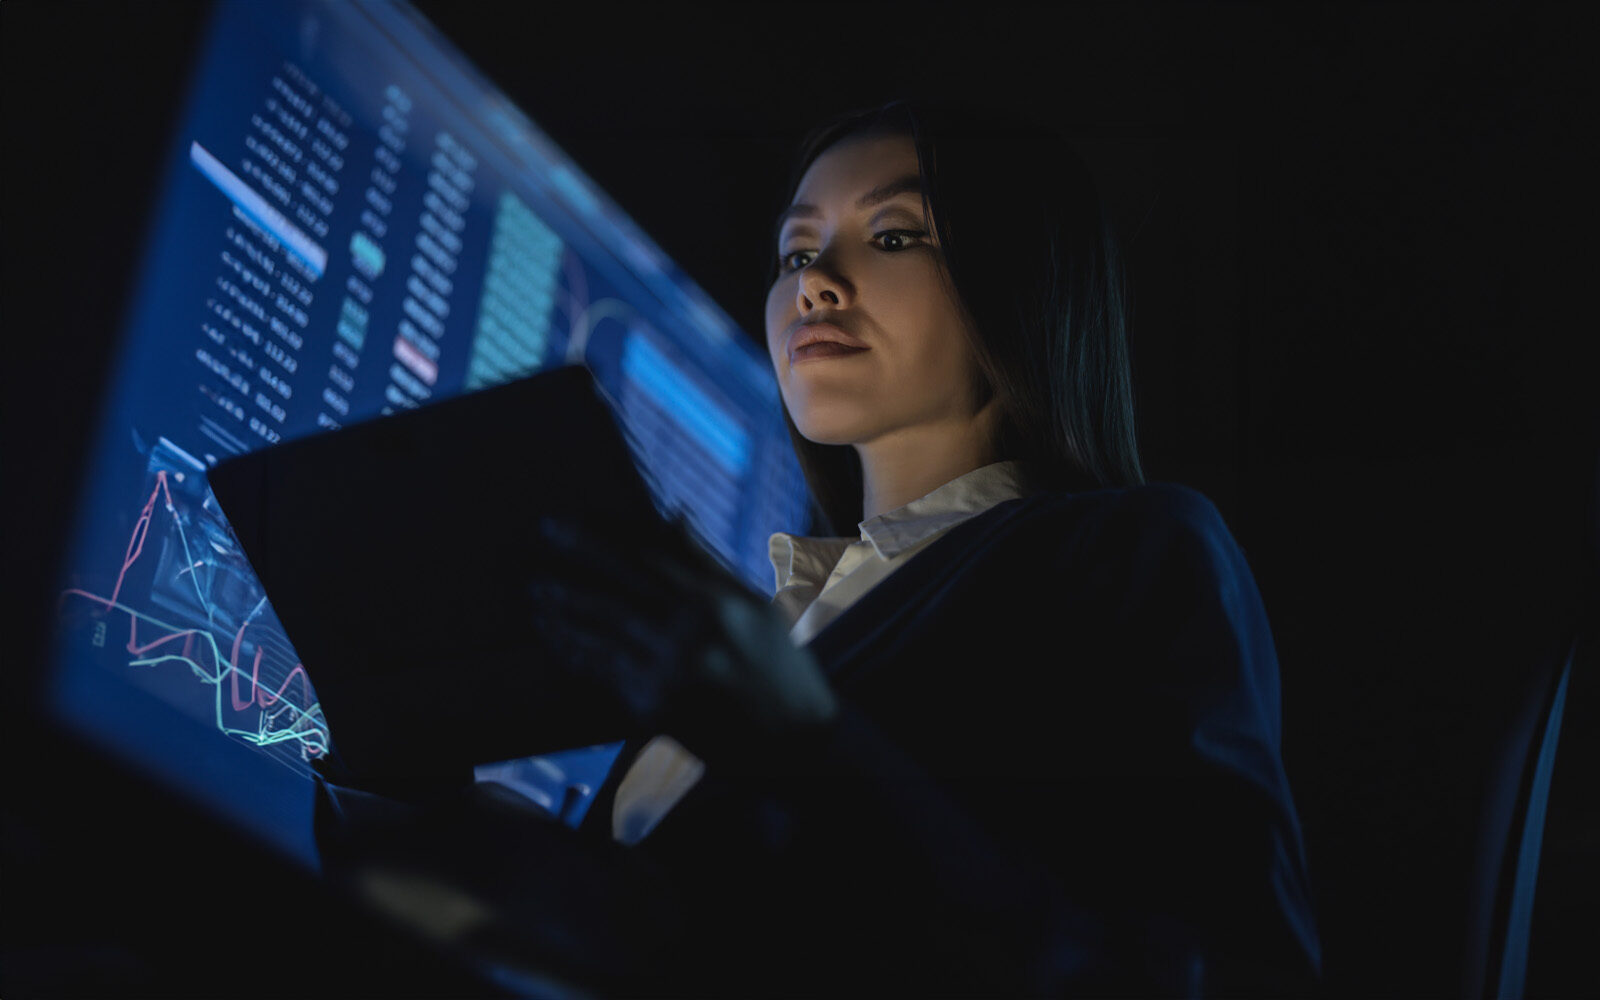 A business woman holding tablet in the dark office